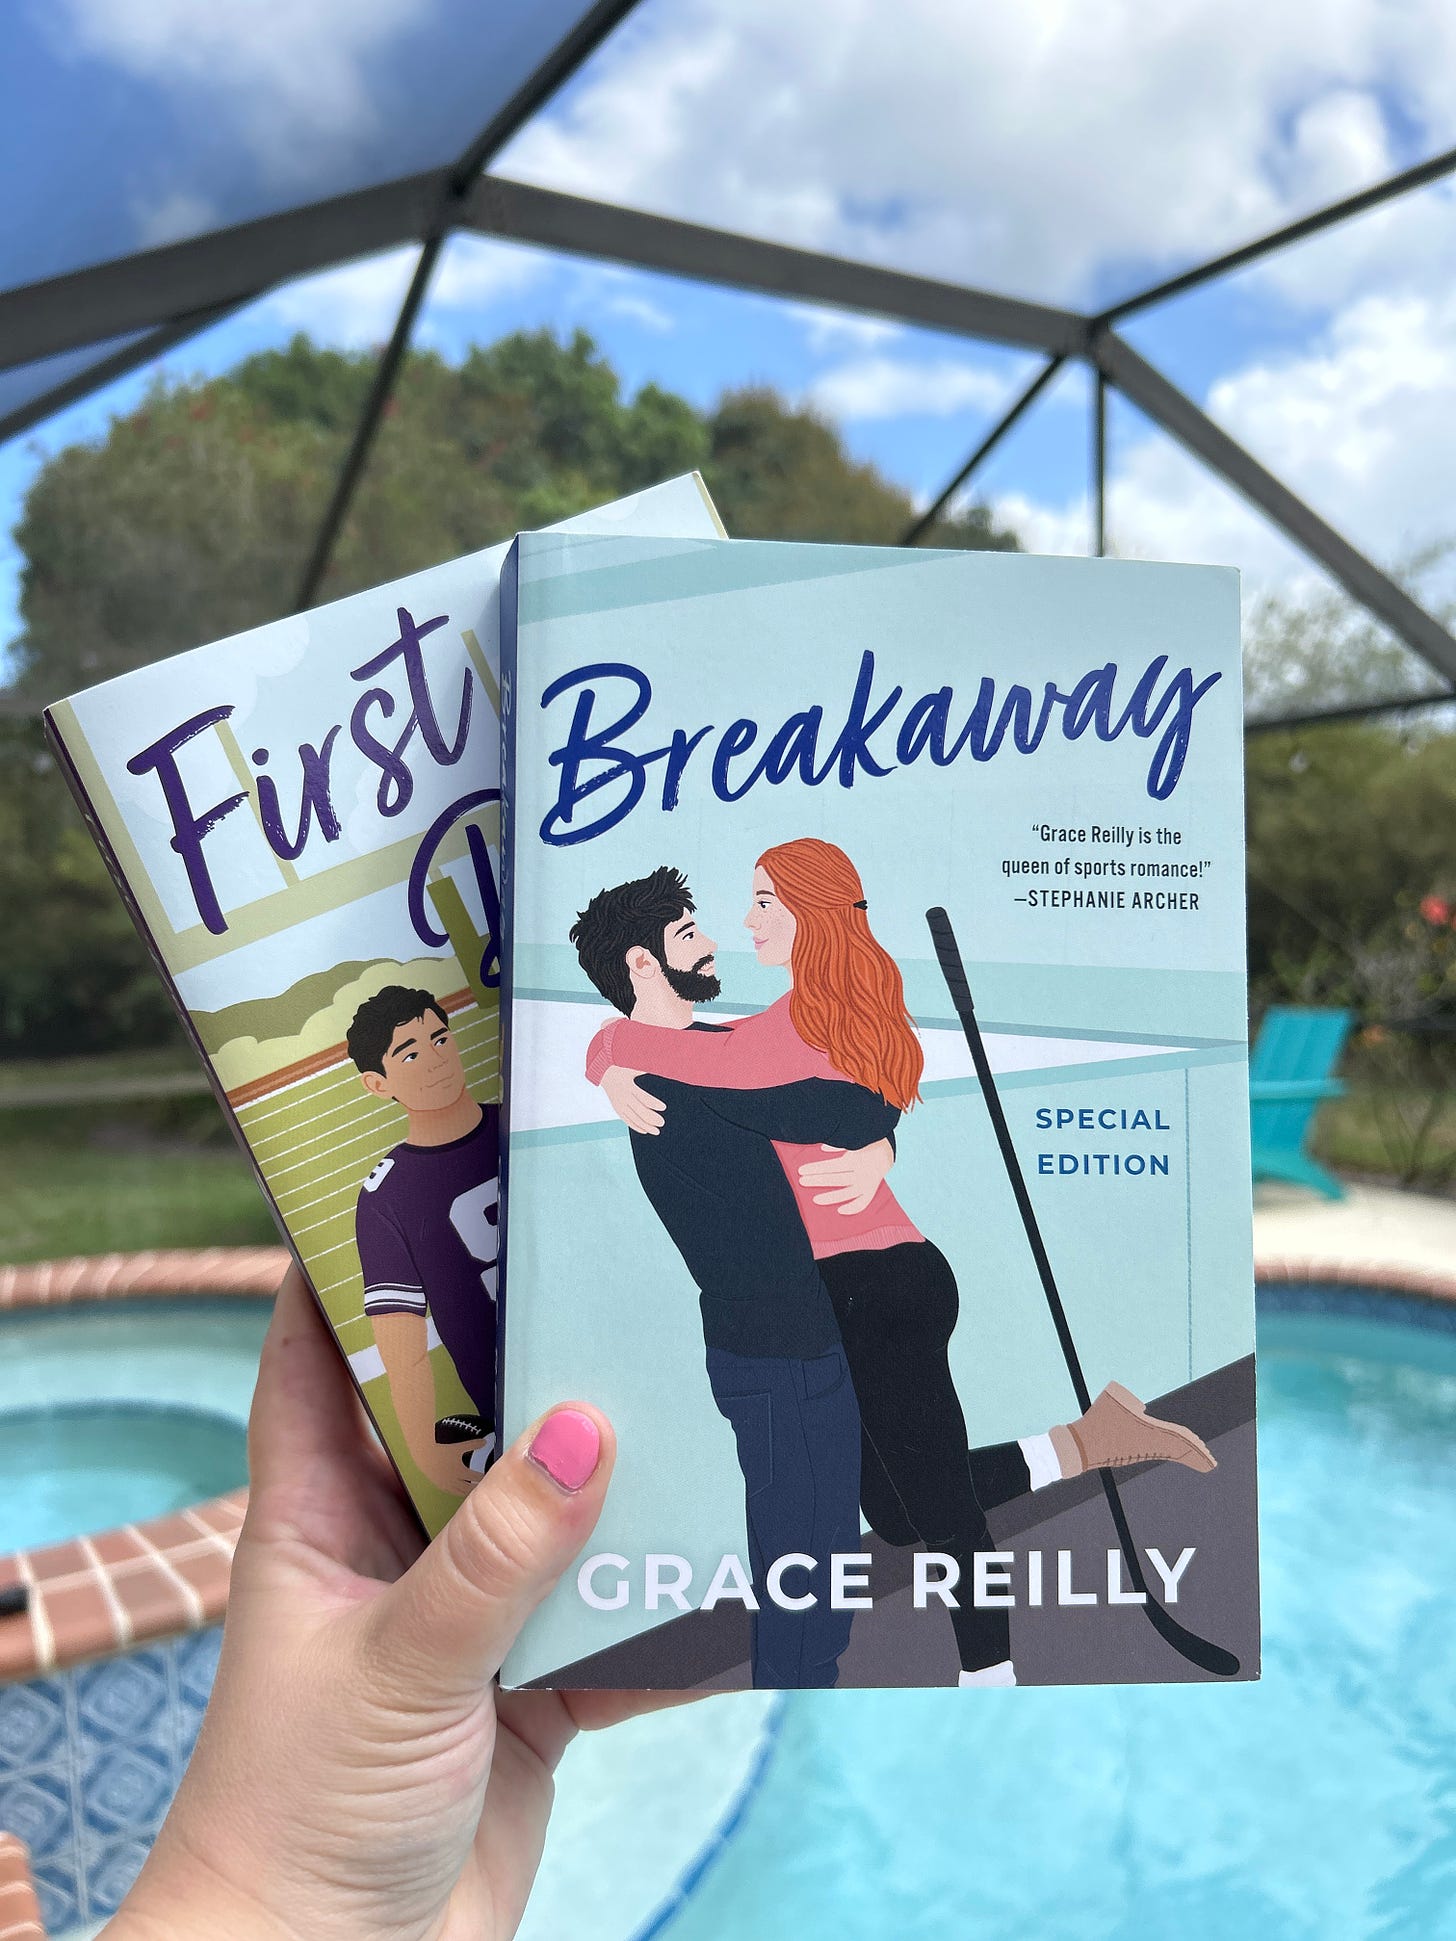 A picture of First Down and Breakaway by Grace Reilly from Avon books, in front of an outdoor pool